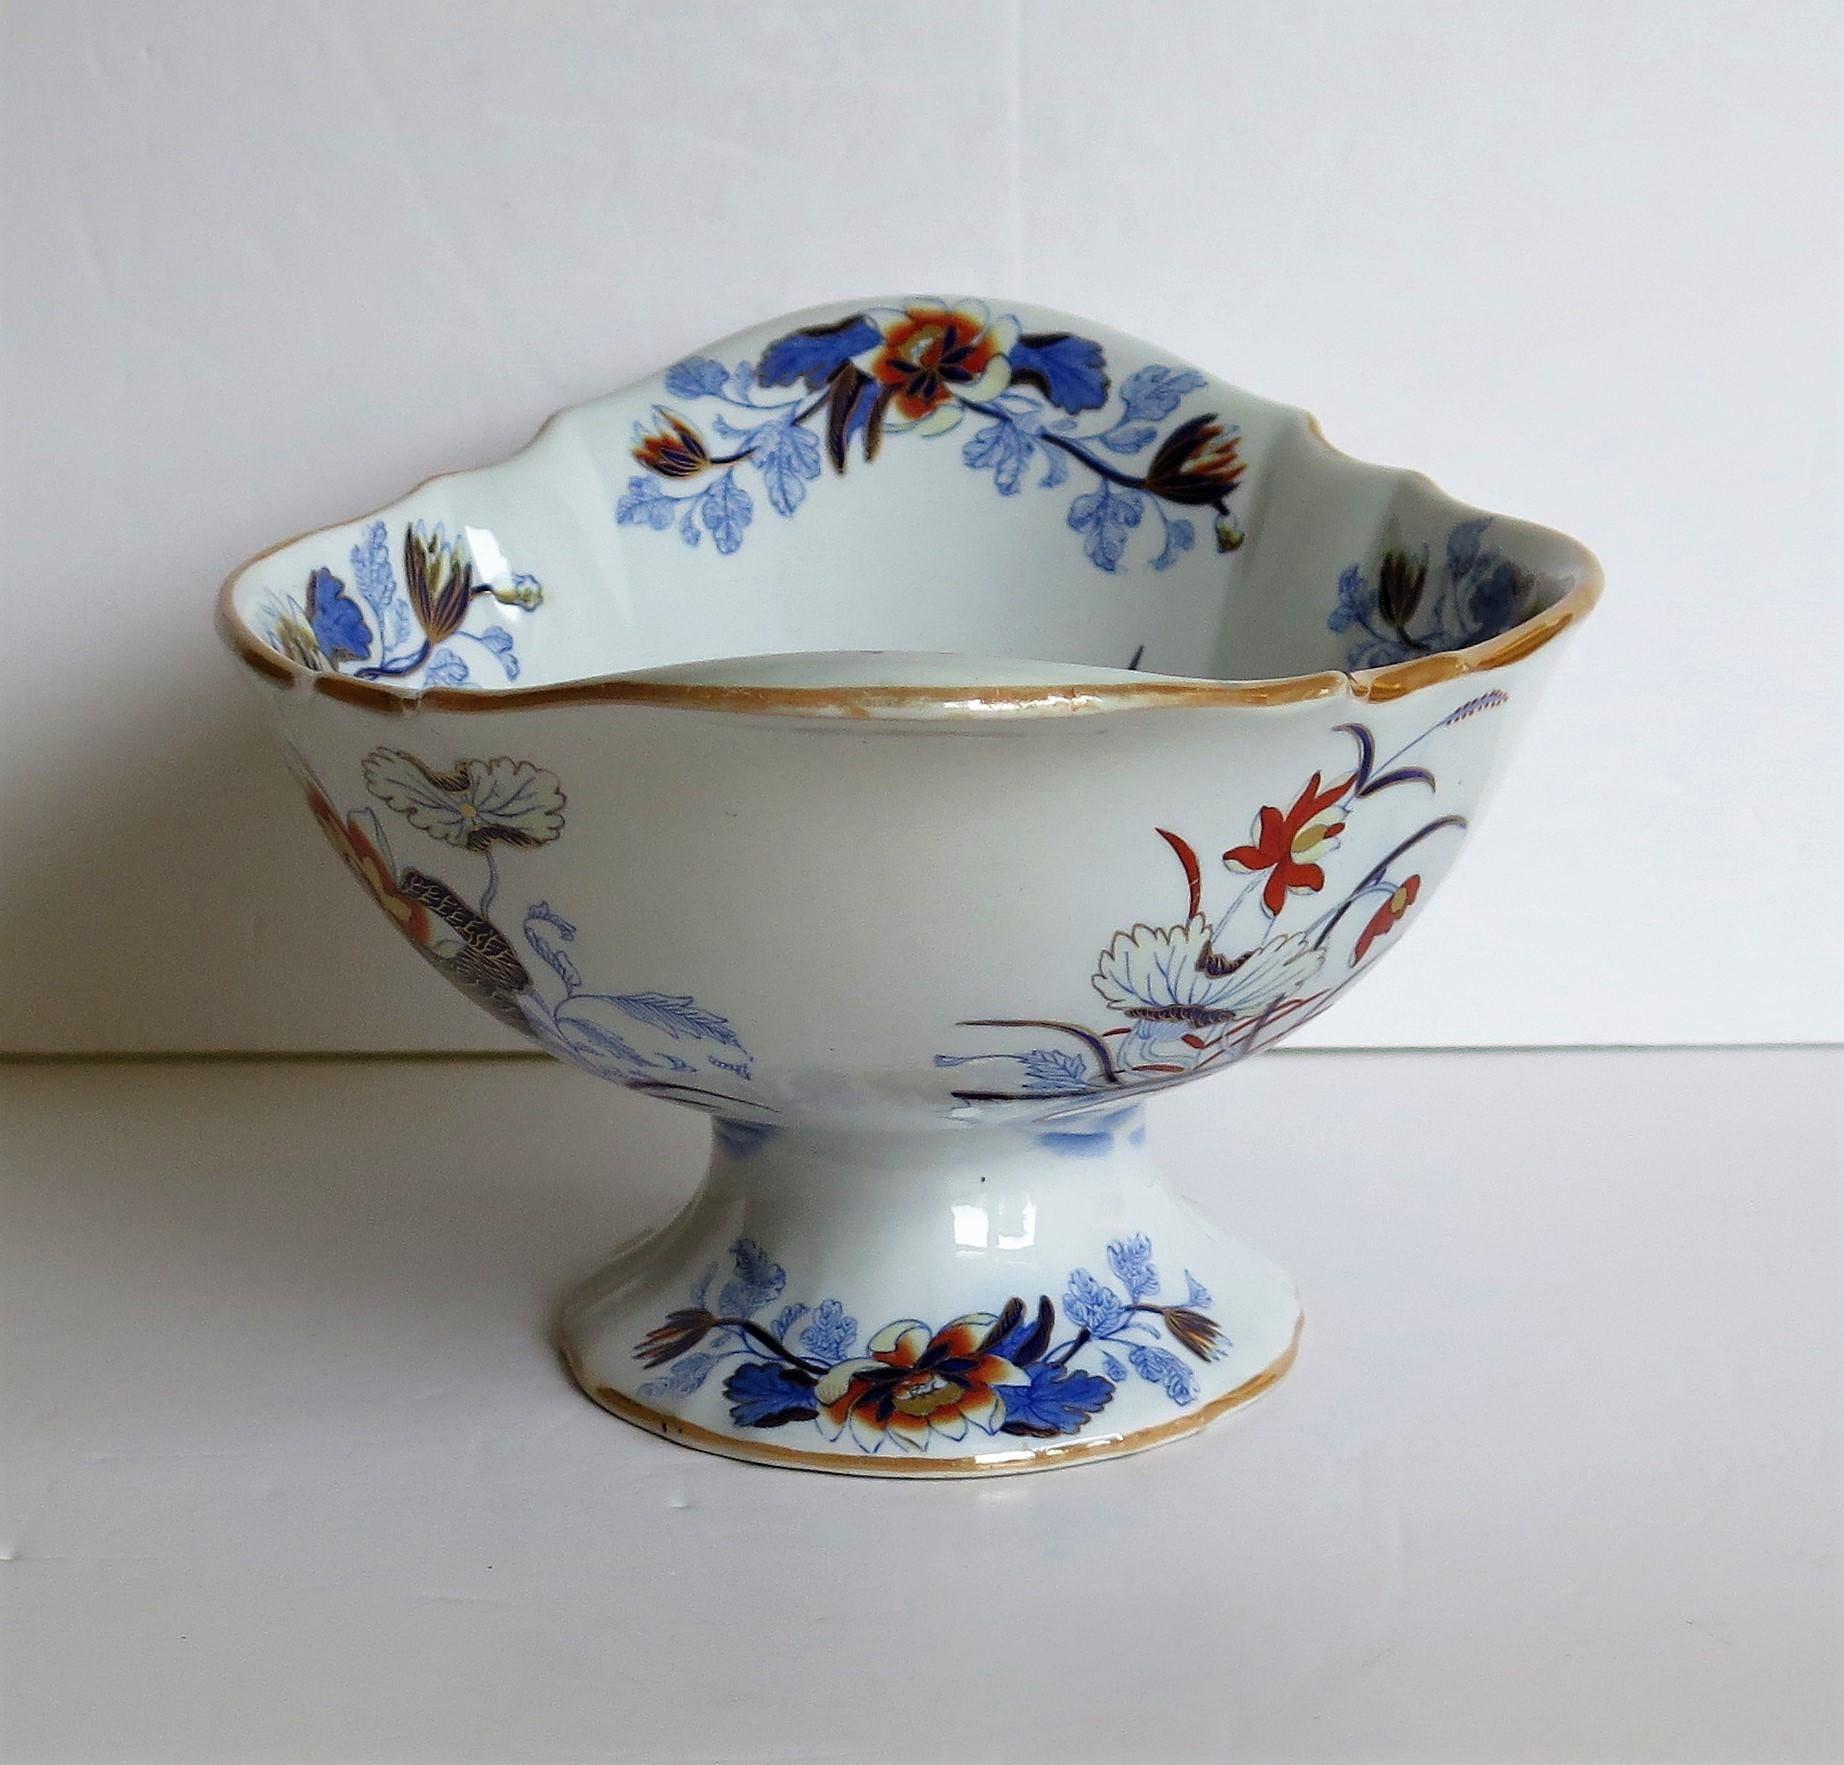 19th Century Large Wedgwood Pedestal Bowl Centrepiece Stone China Ptn 1156, circa 1840 For Sale